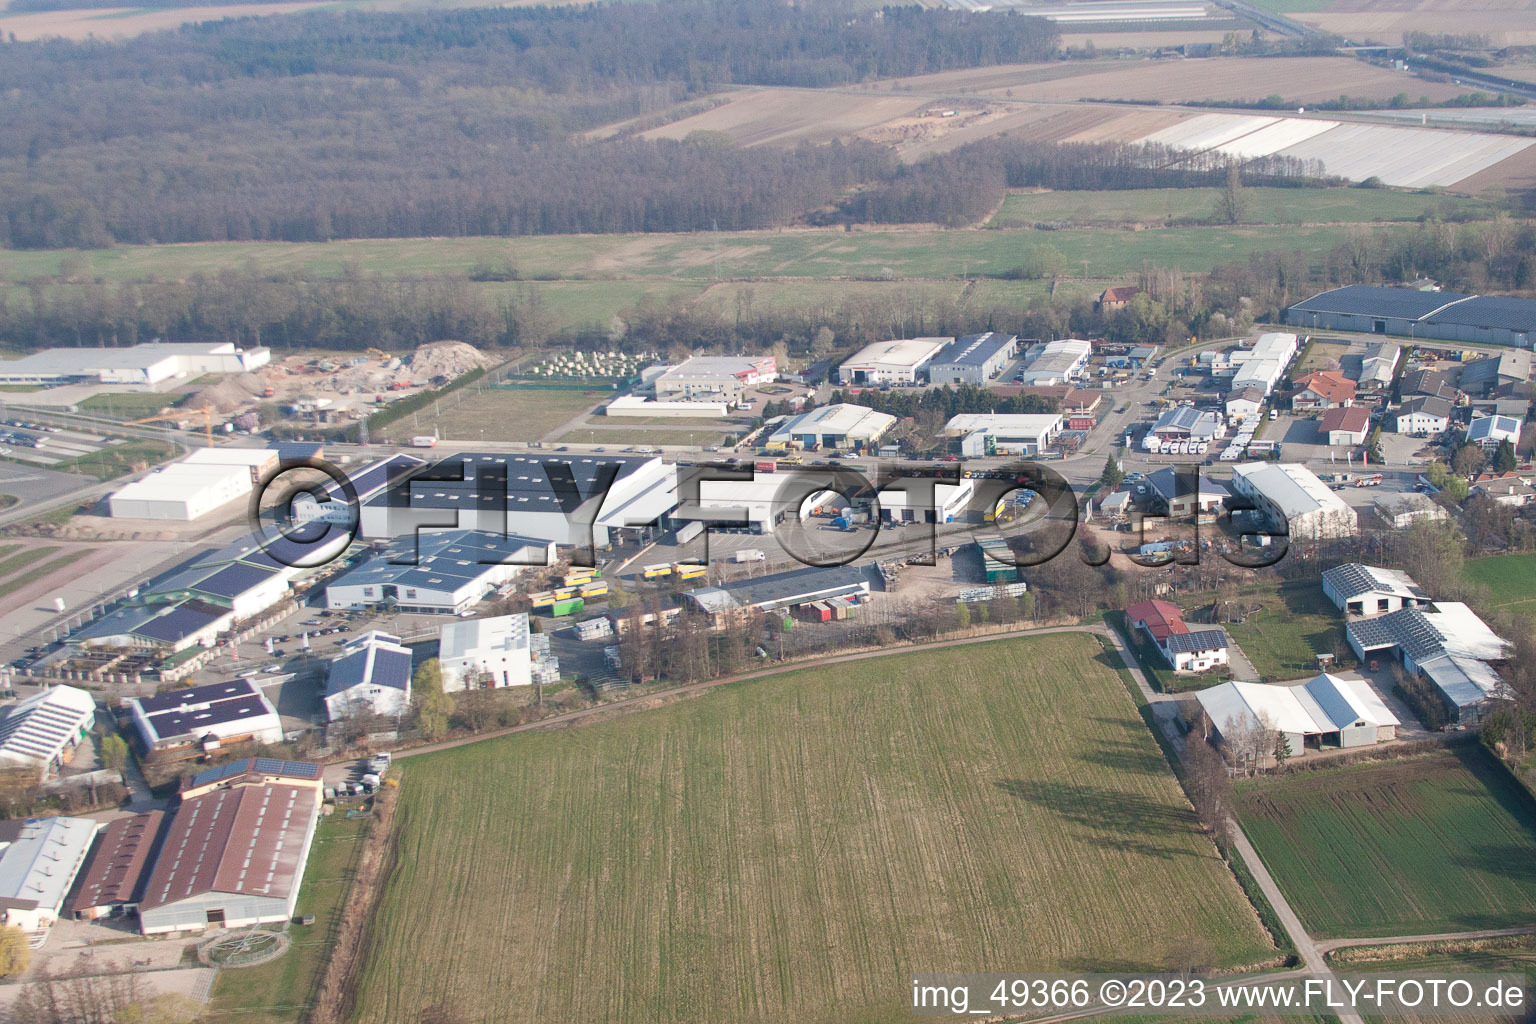 Horst industrial area in the district Minderslachen in Kandel in the state Rhineland-Palatinate, Germany from the plane